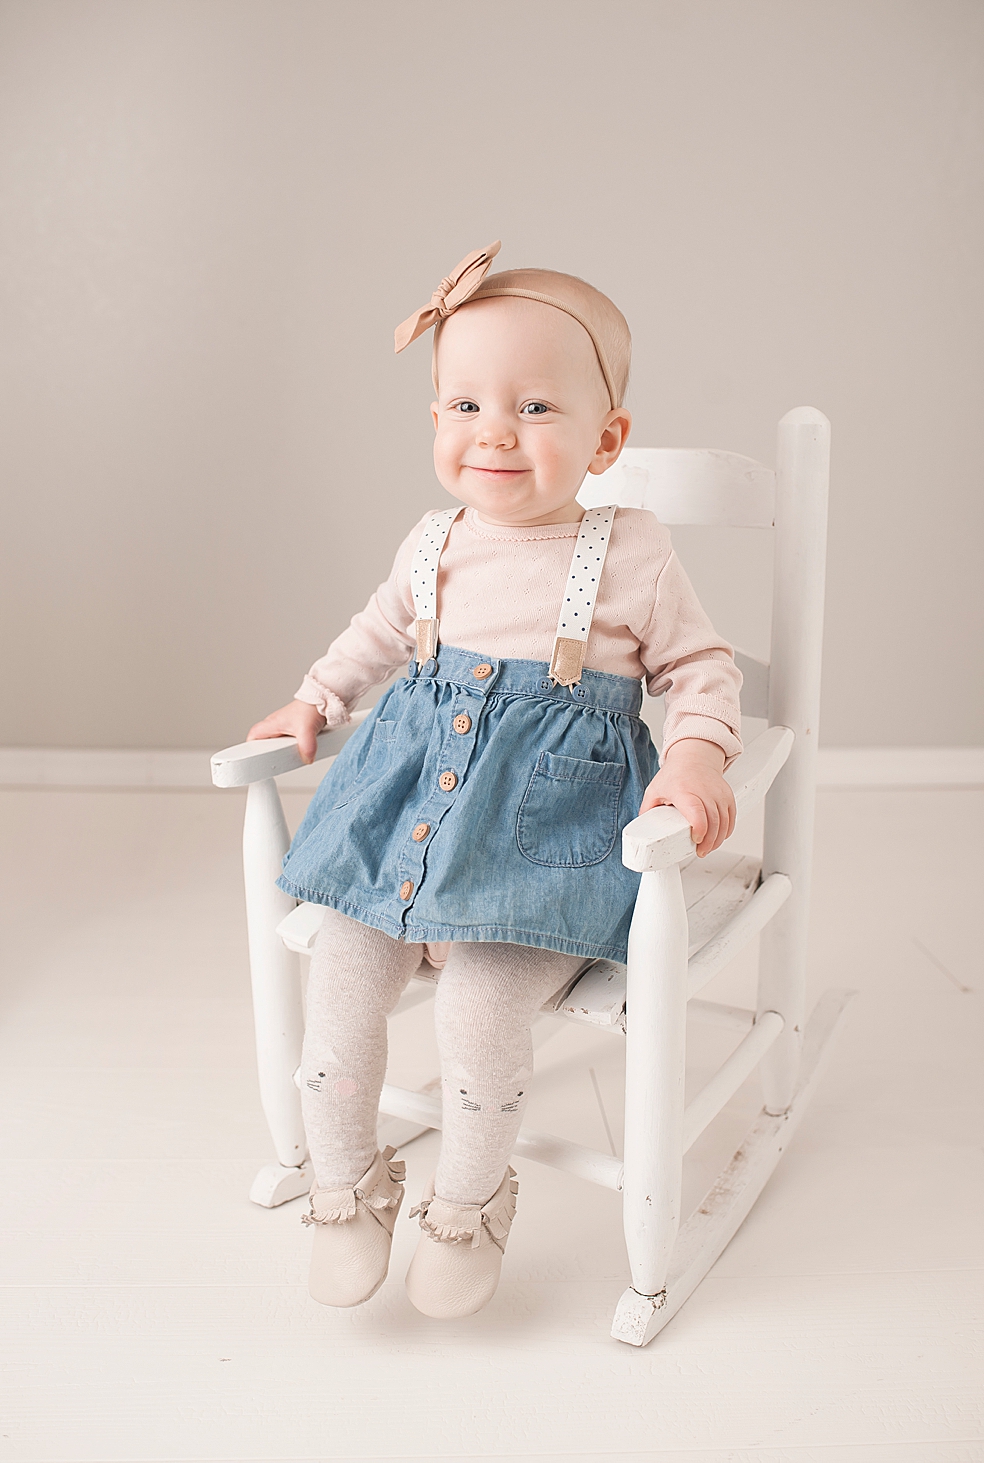 Smiling toddler girl in a white rocking chair | Photo by Decatur Alabama Baby Photographer Jessica Lee 